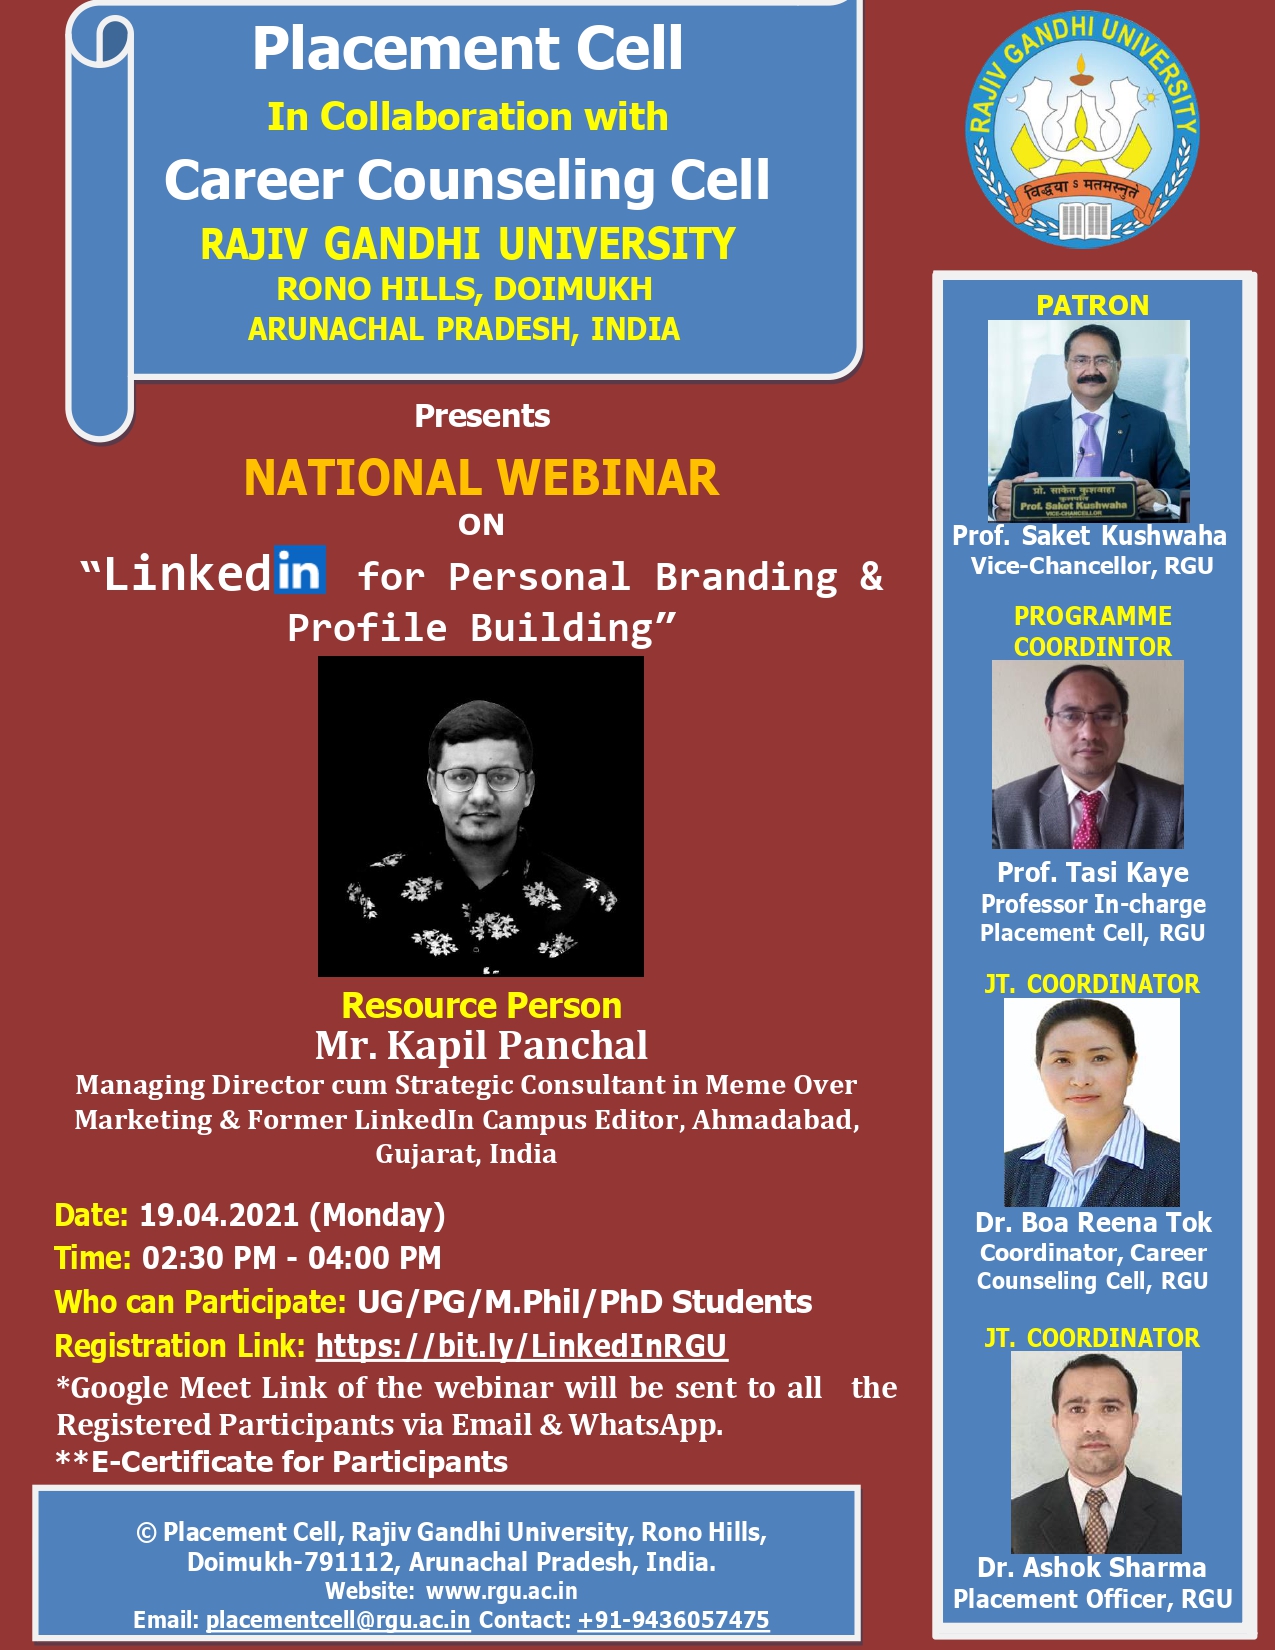 Placement Cell Rgu Placement Cell Amp Career Counseling Cell Rgu1984 Presents A National Webinar On Linkedin For Personal Branding Amp Profile Building Saket Kushwaha4 Tasikaye Registration Link T Co Ww1rfrljek